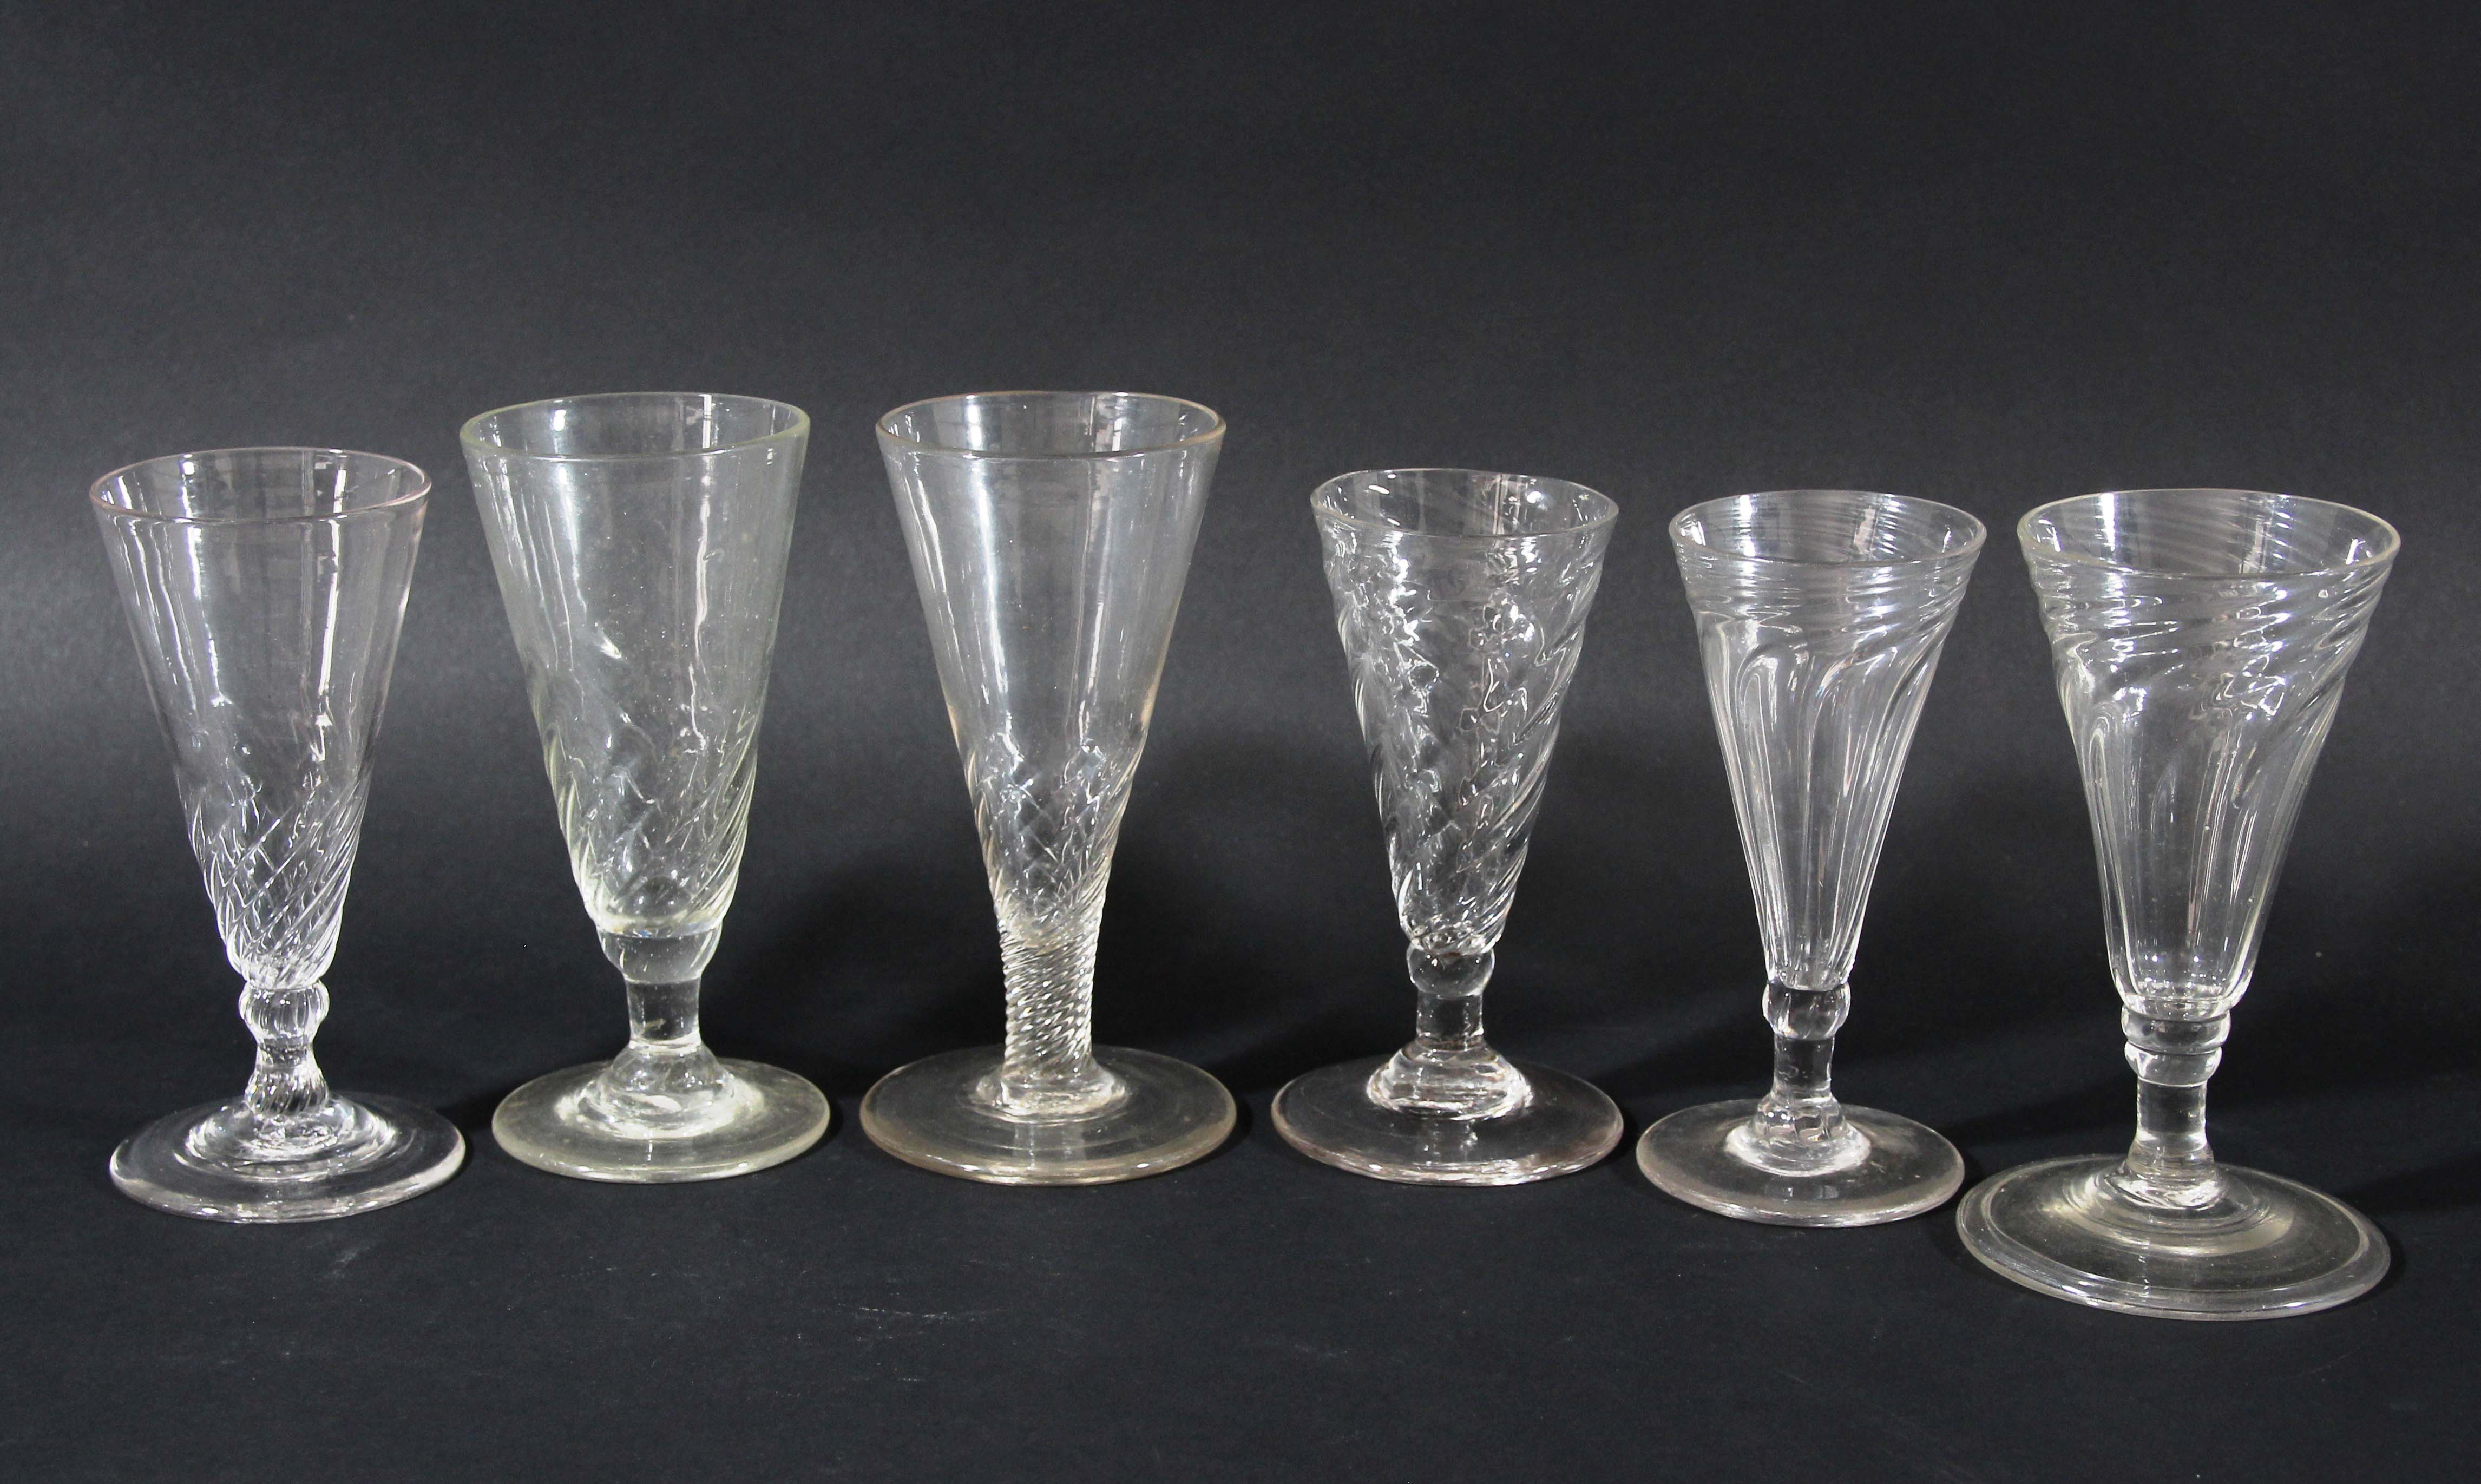 GROUP OF SIX GLASSES, late 18th century, the drawn trumpet bowls with wrythen twist, heights 12-13cm